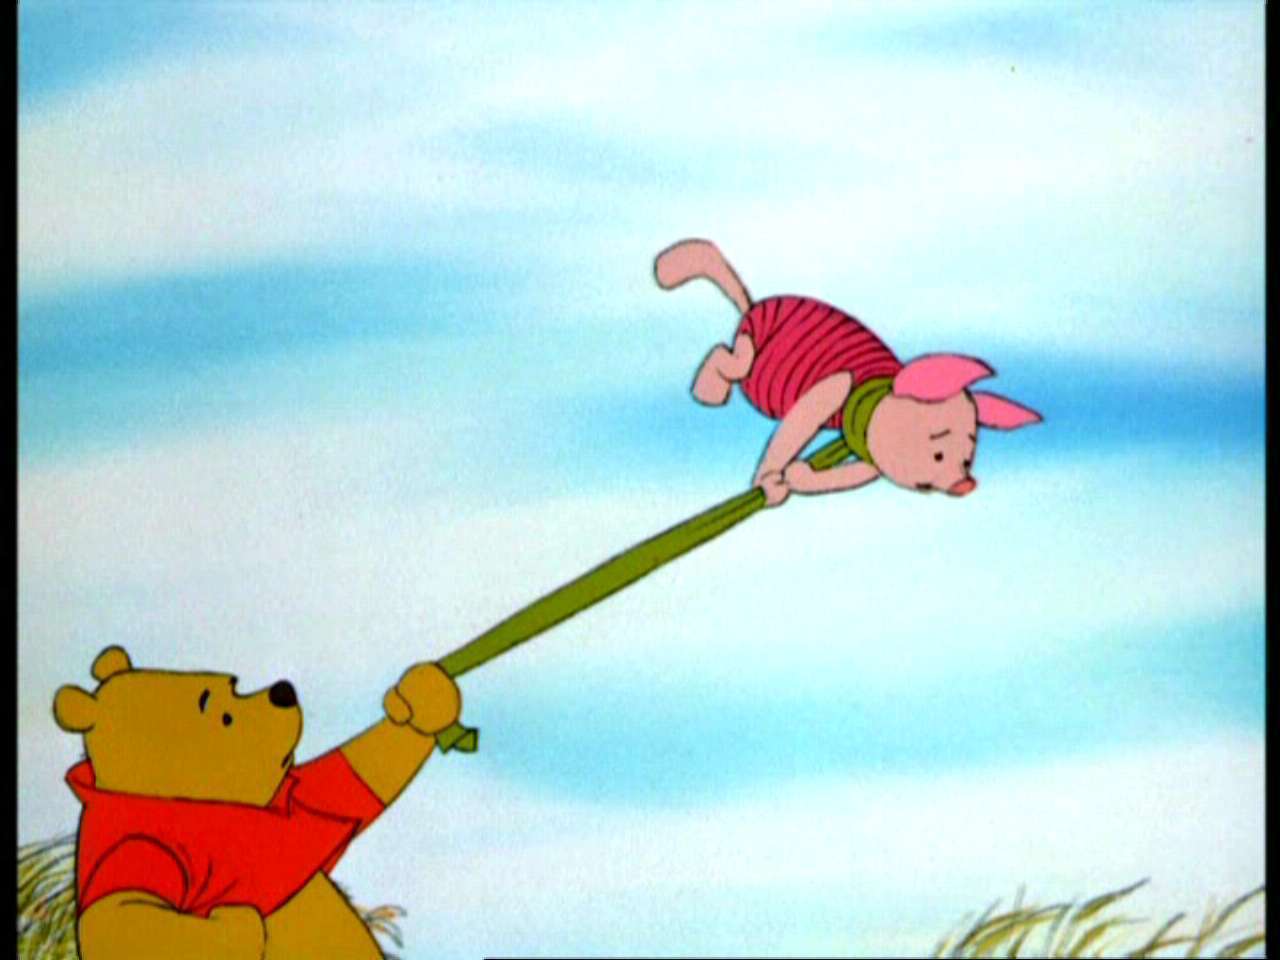 https://vignette.wikia.nocookie.net/winniethepooh/images/4/4d/Winnie-the-Pooh-and-the-Blustery-Day-winnie-the-pooh-2021475-1280-960.jpg/revision/latest?cb=20111106031253